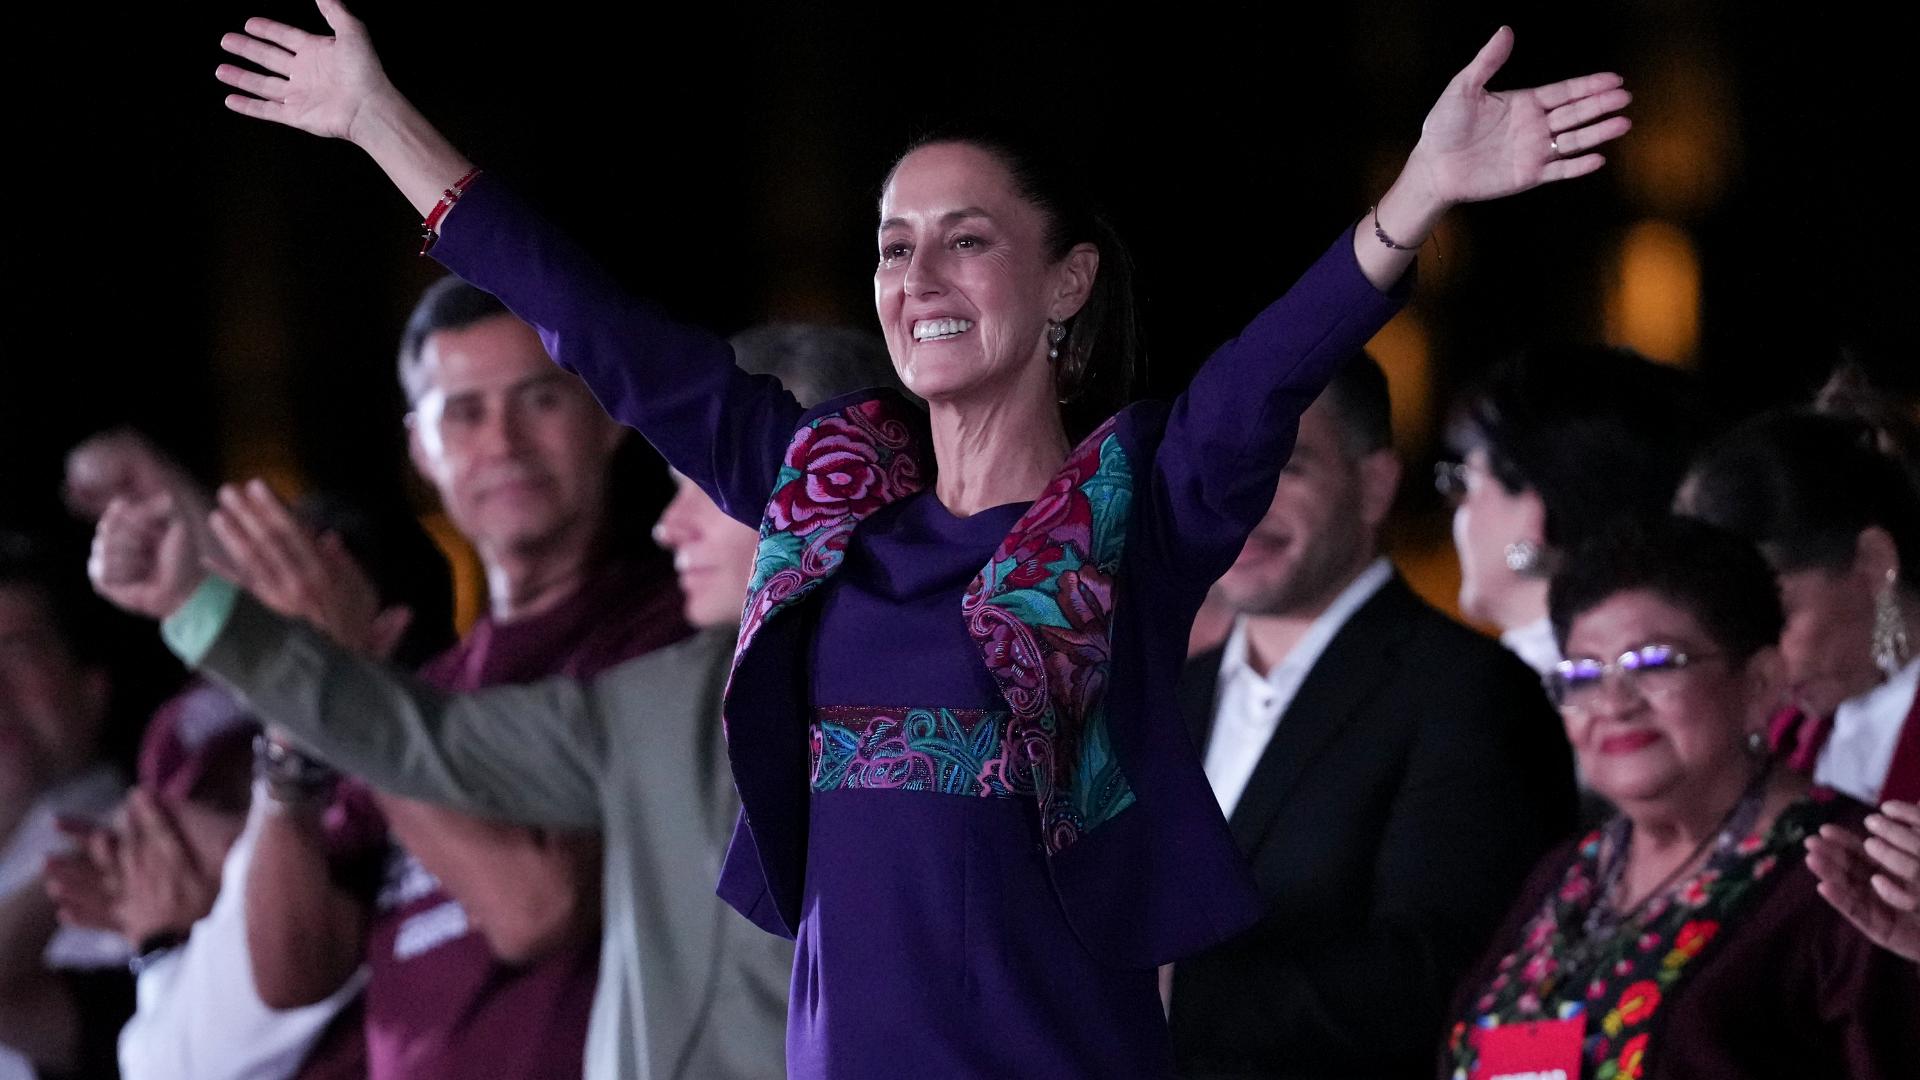 Sheinbaum, a climate scientist and former Mexico City mayor, said that her two competitors had called her and conceded her victory.